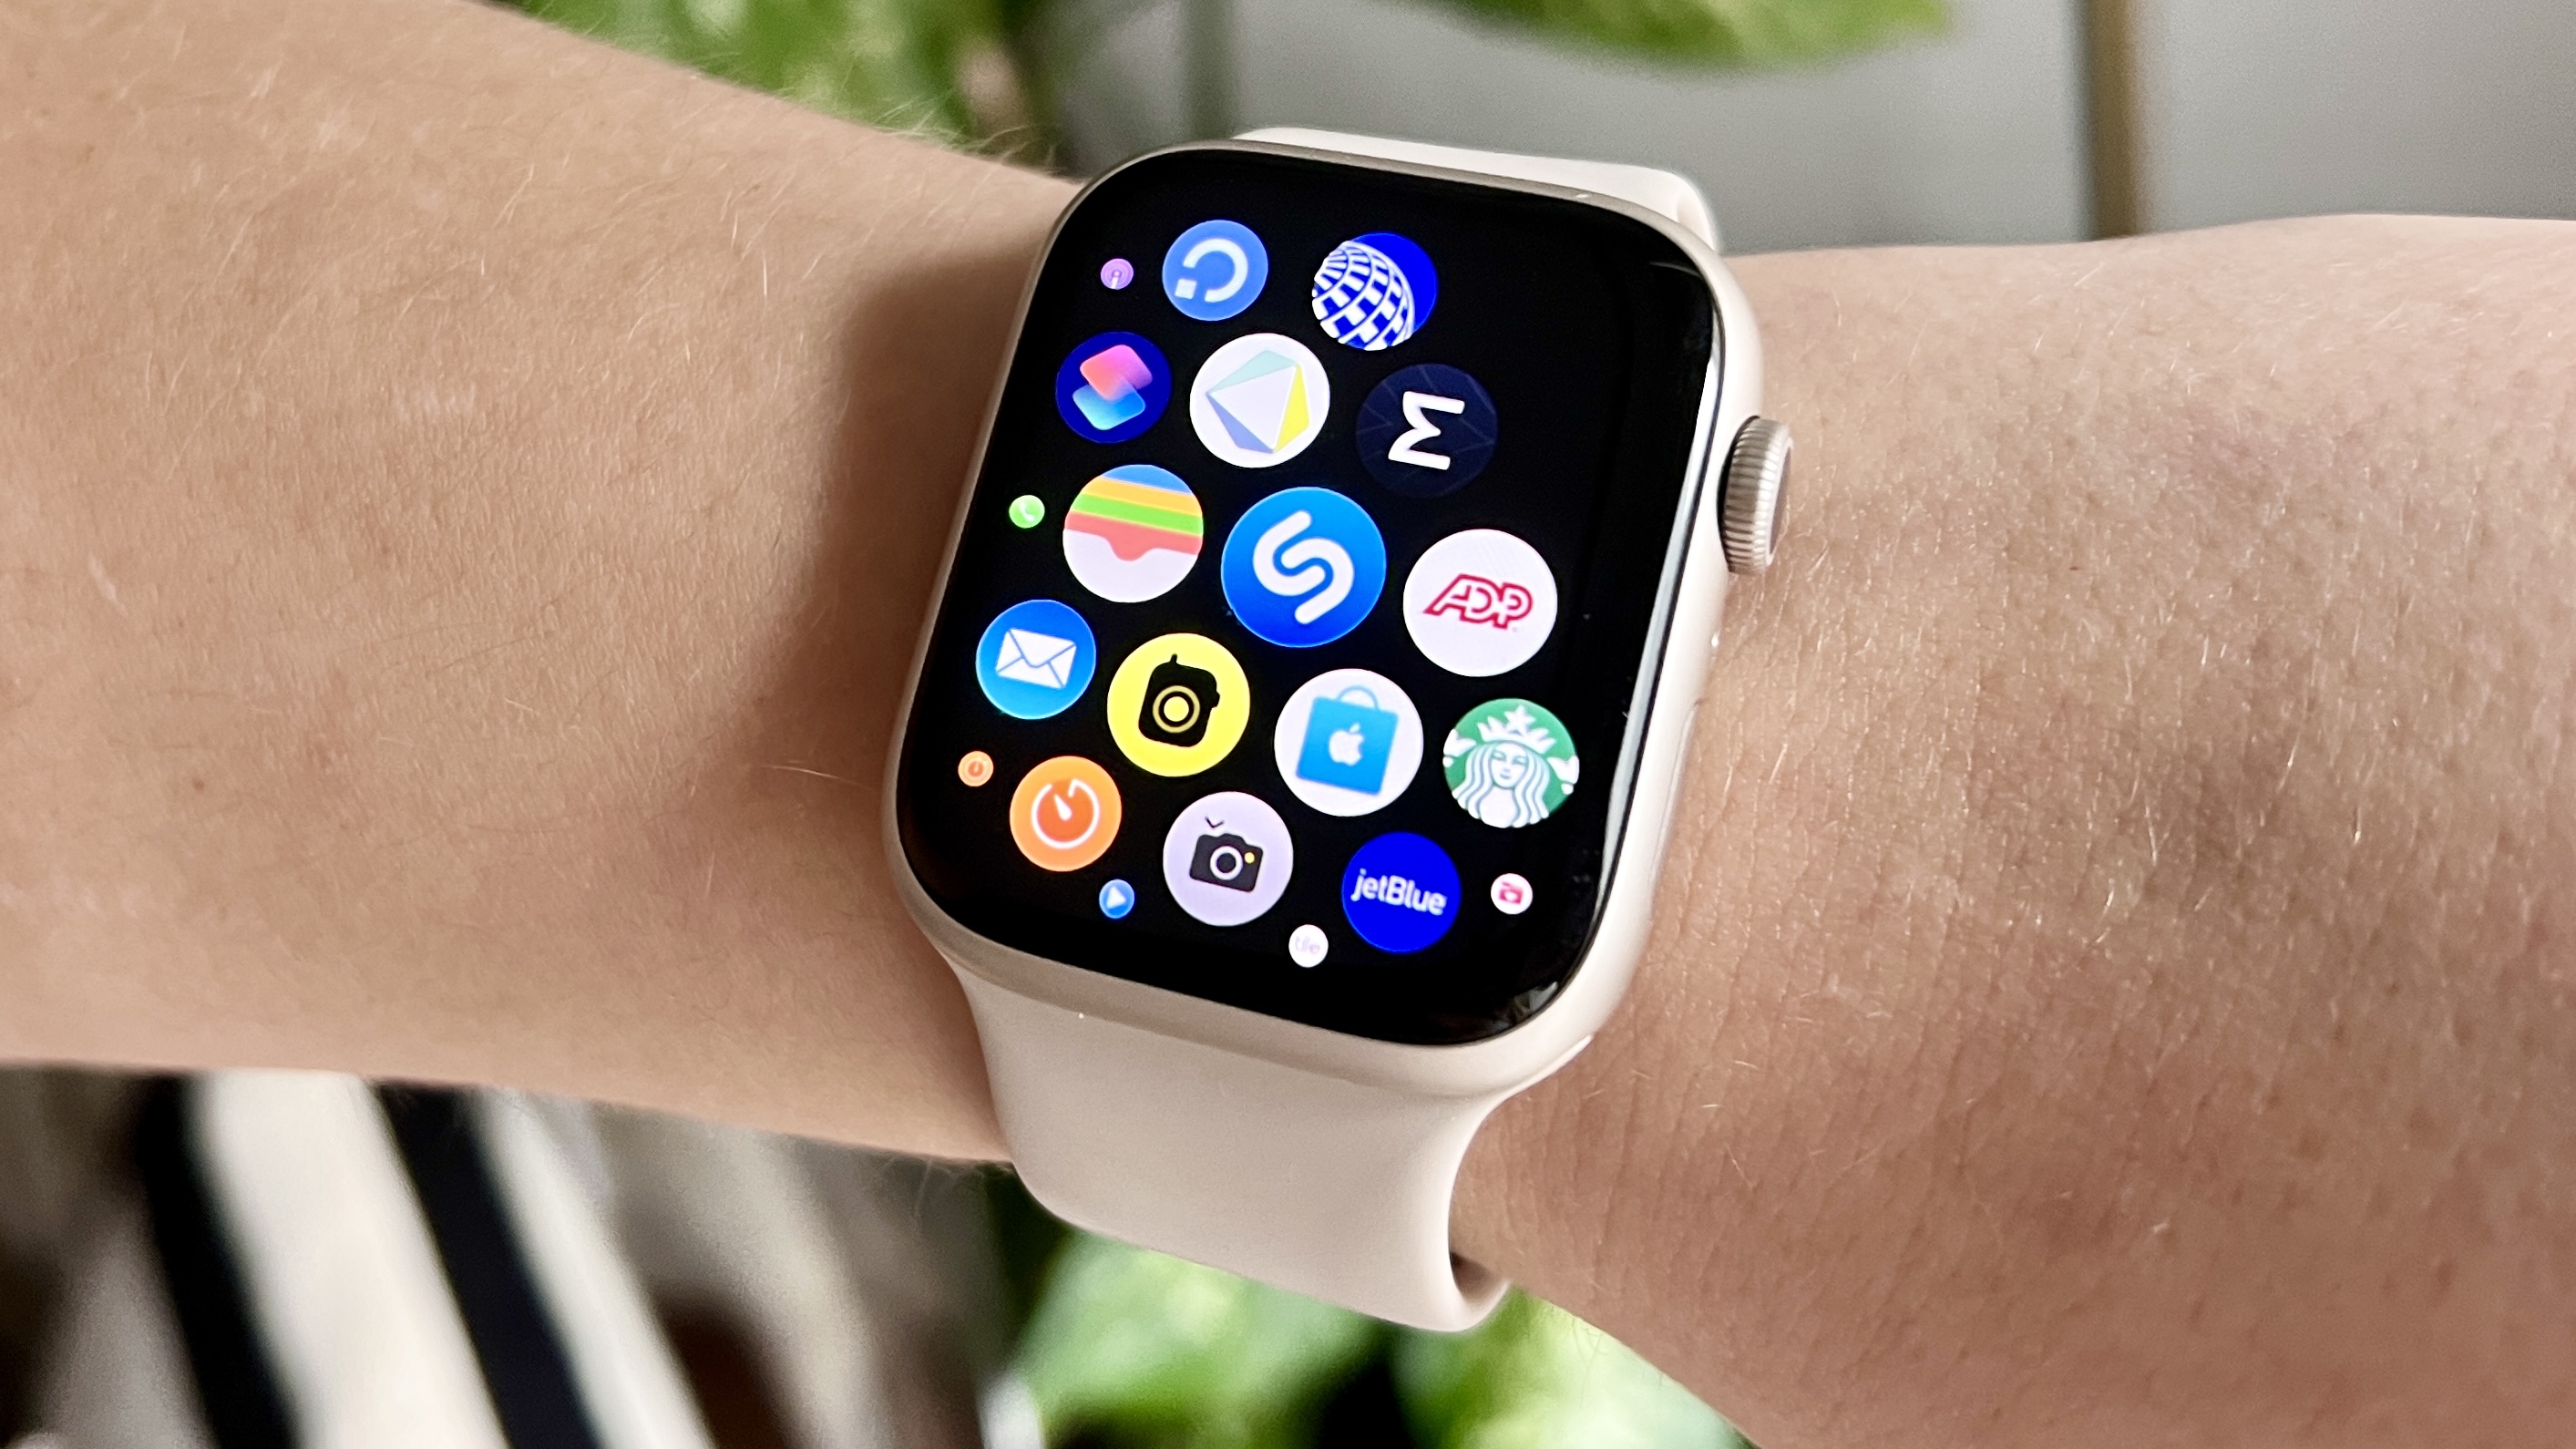 Viewing the Apple Watch Shazam app grid